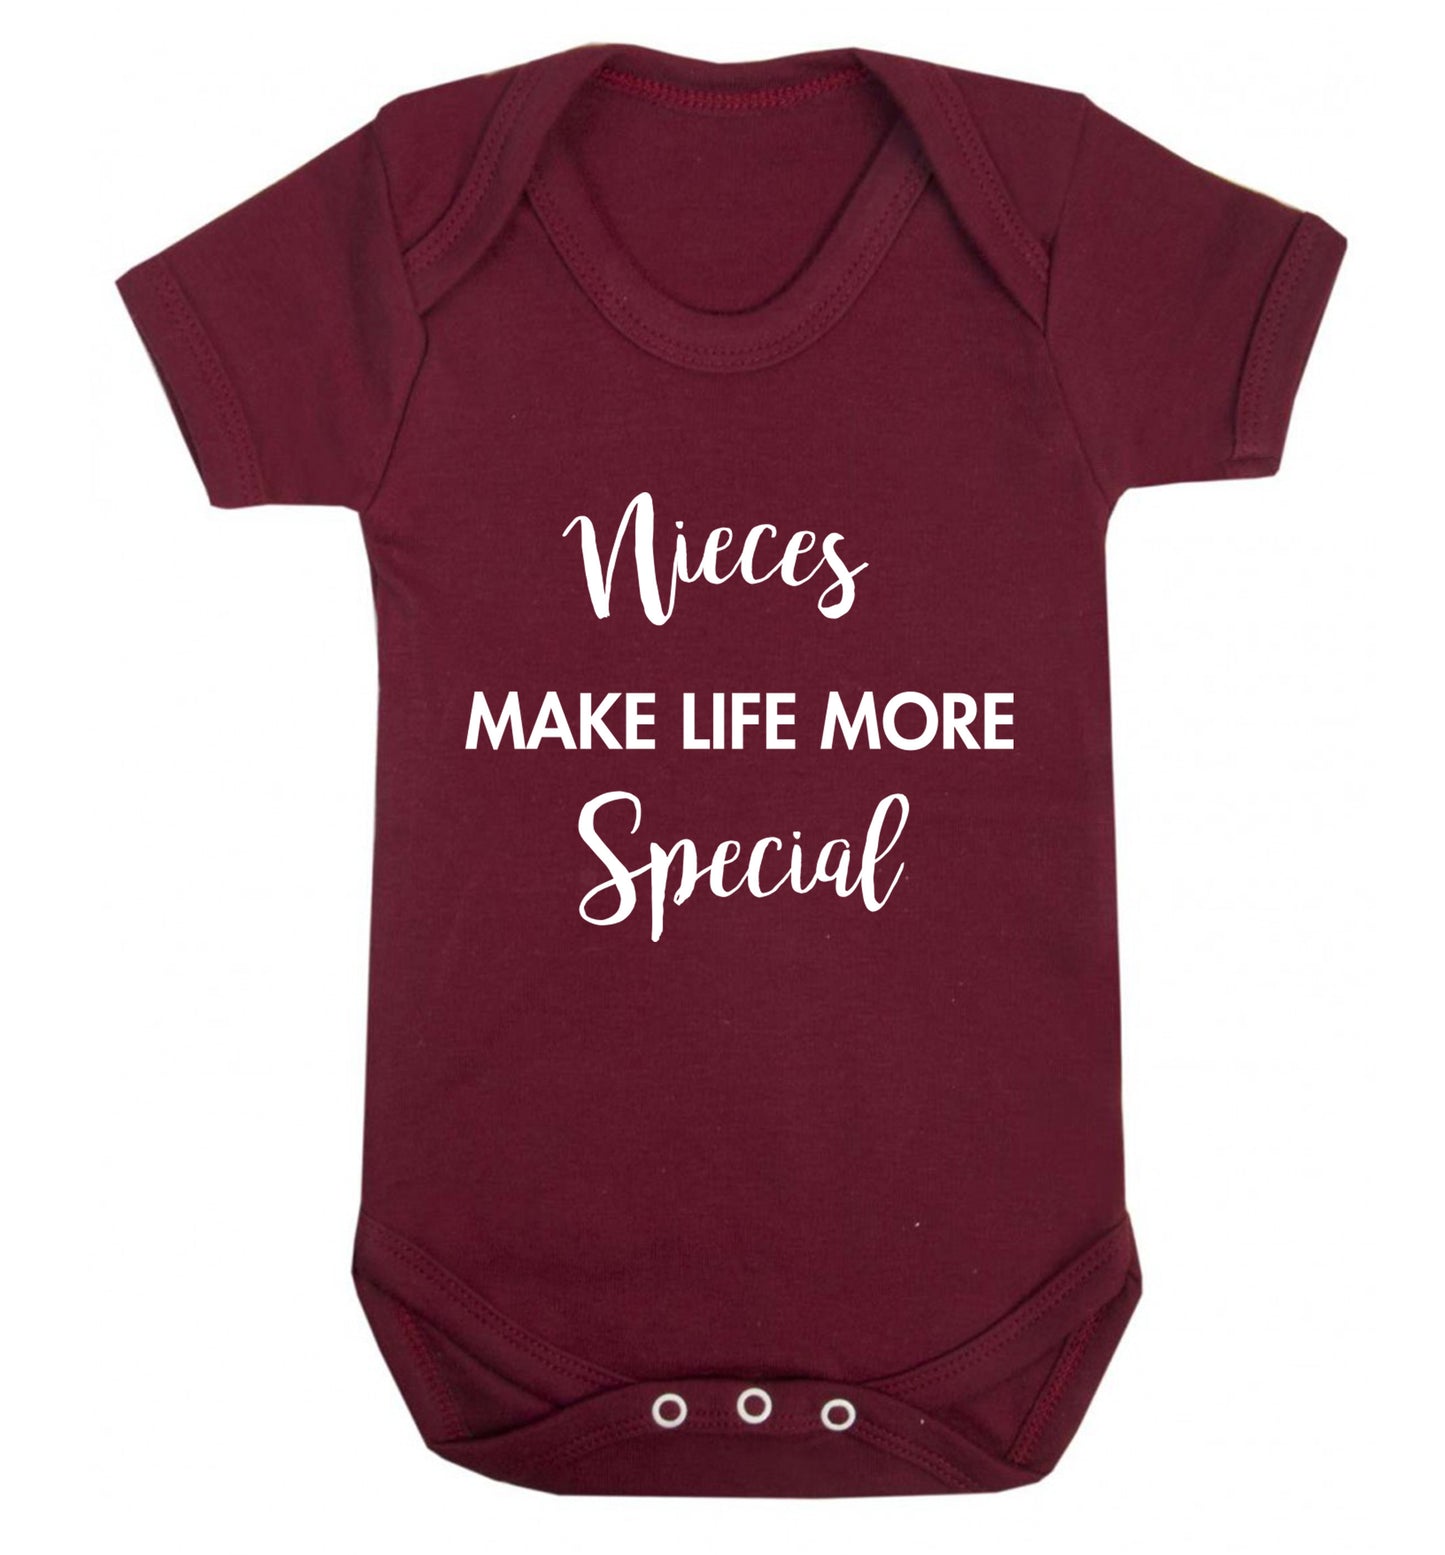 Nieces make life more special Baby Vest maroon 18-24 months